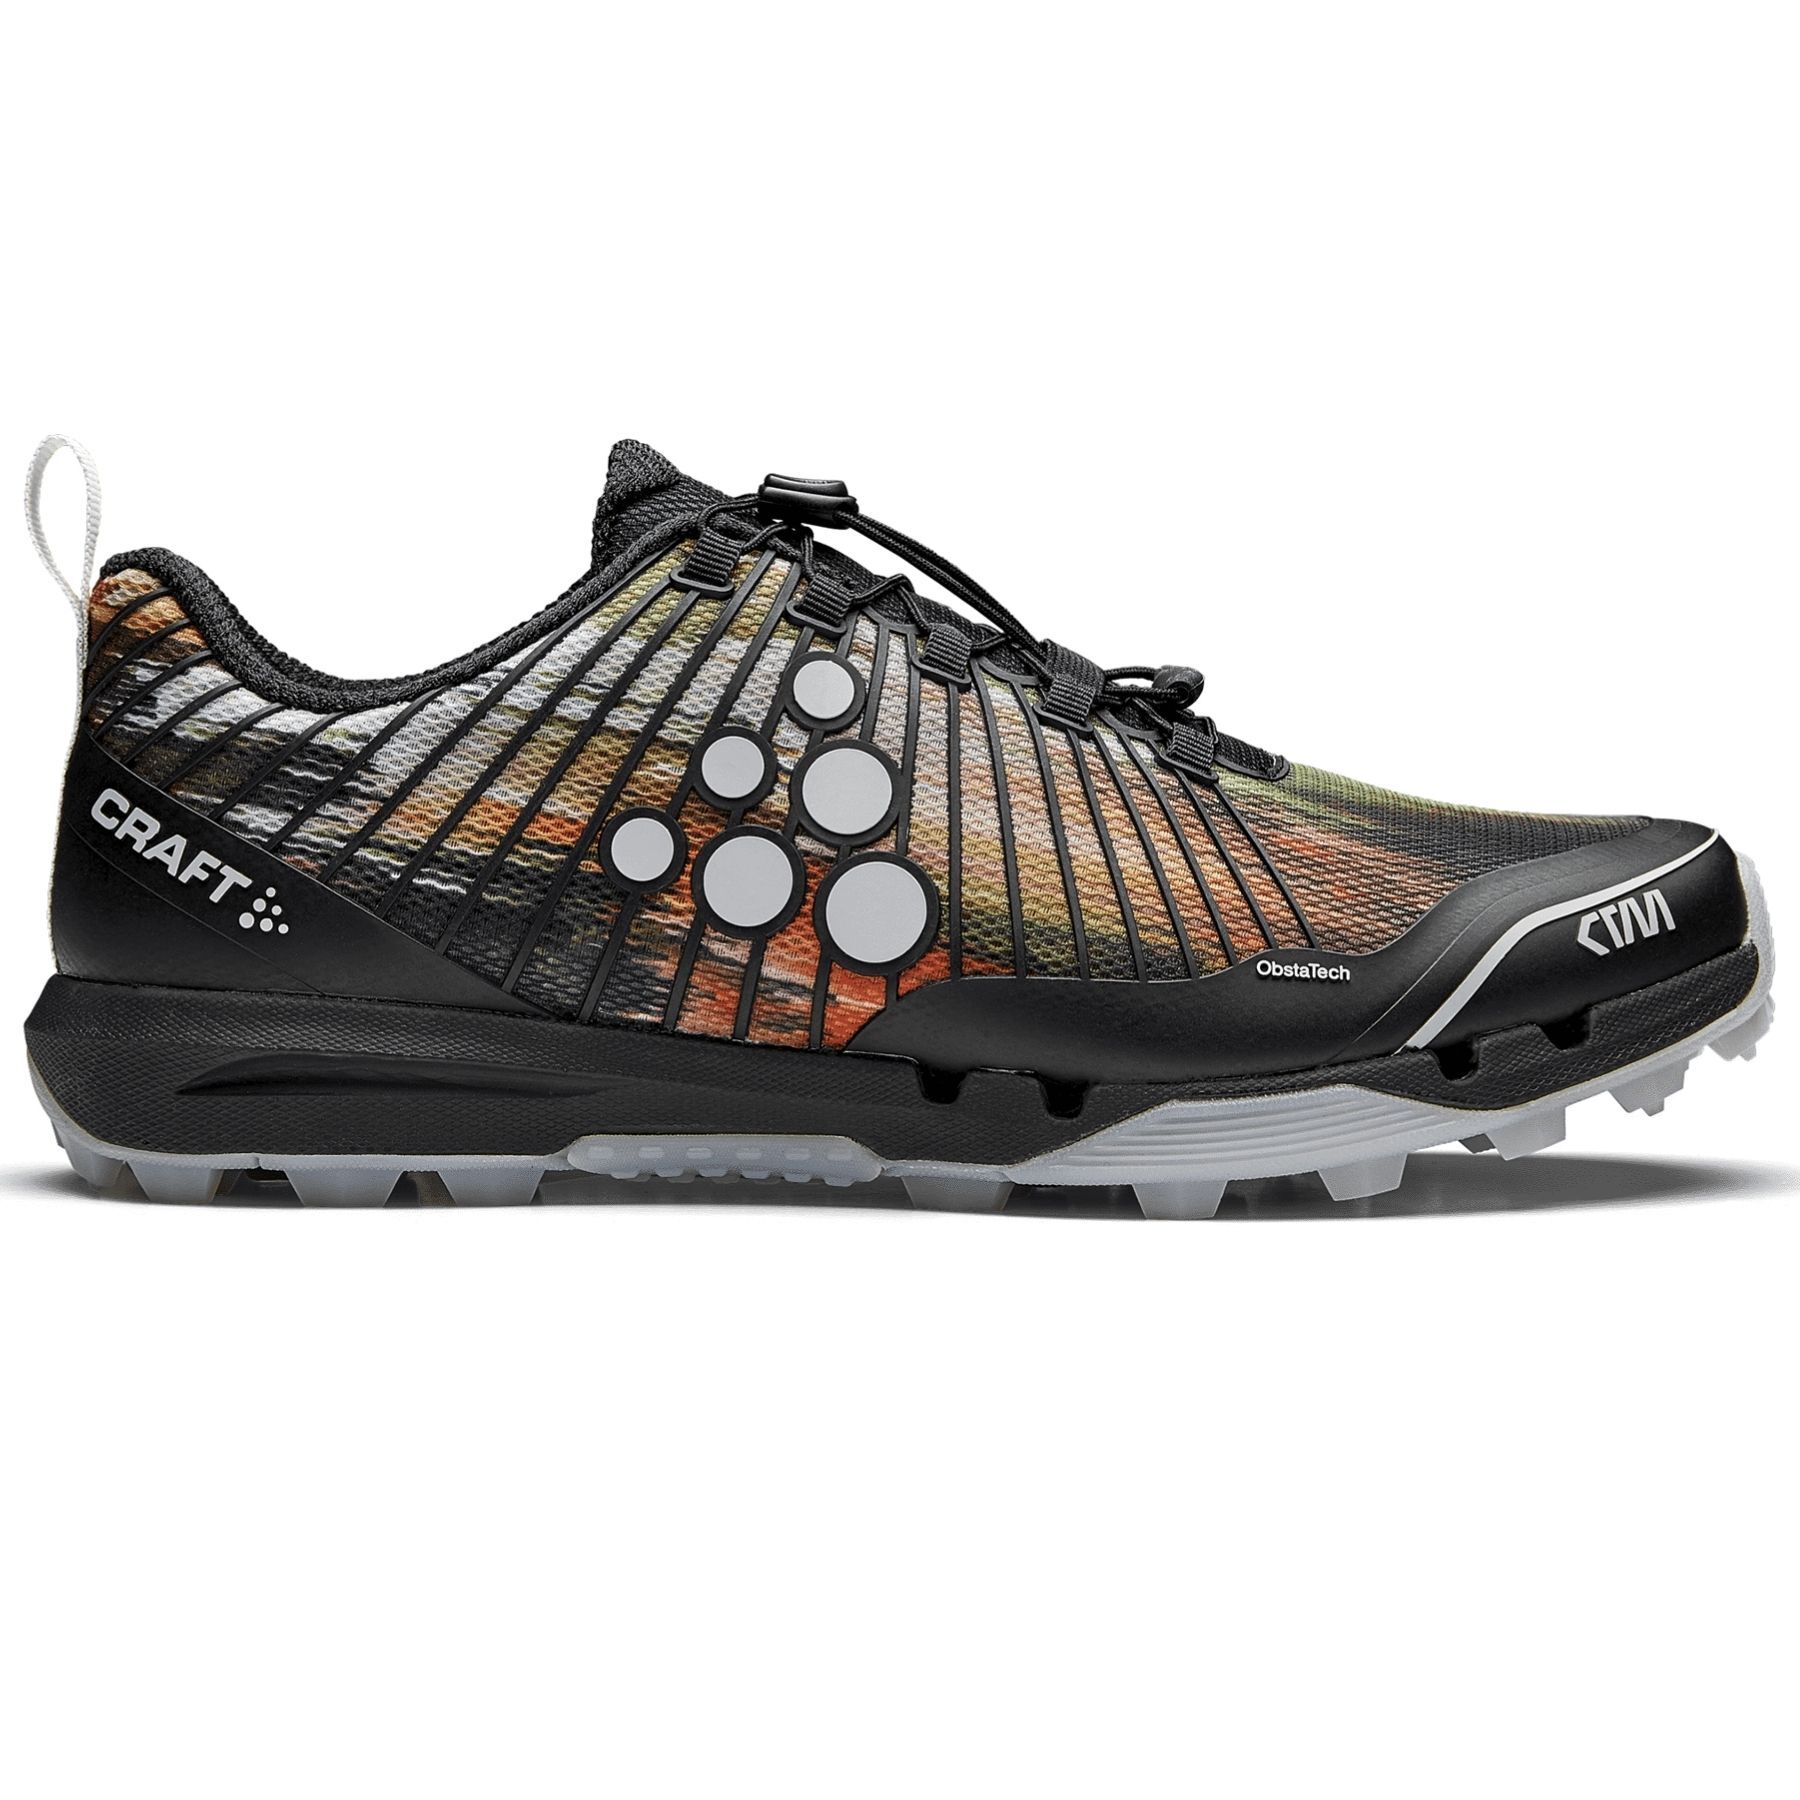 Craft OCRxCTM - Chaussures trail homme | Hardloop